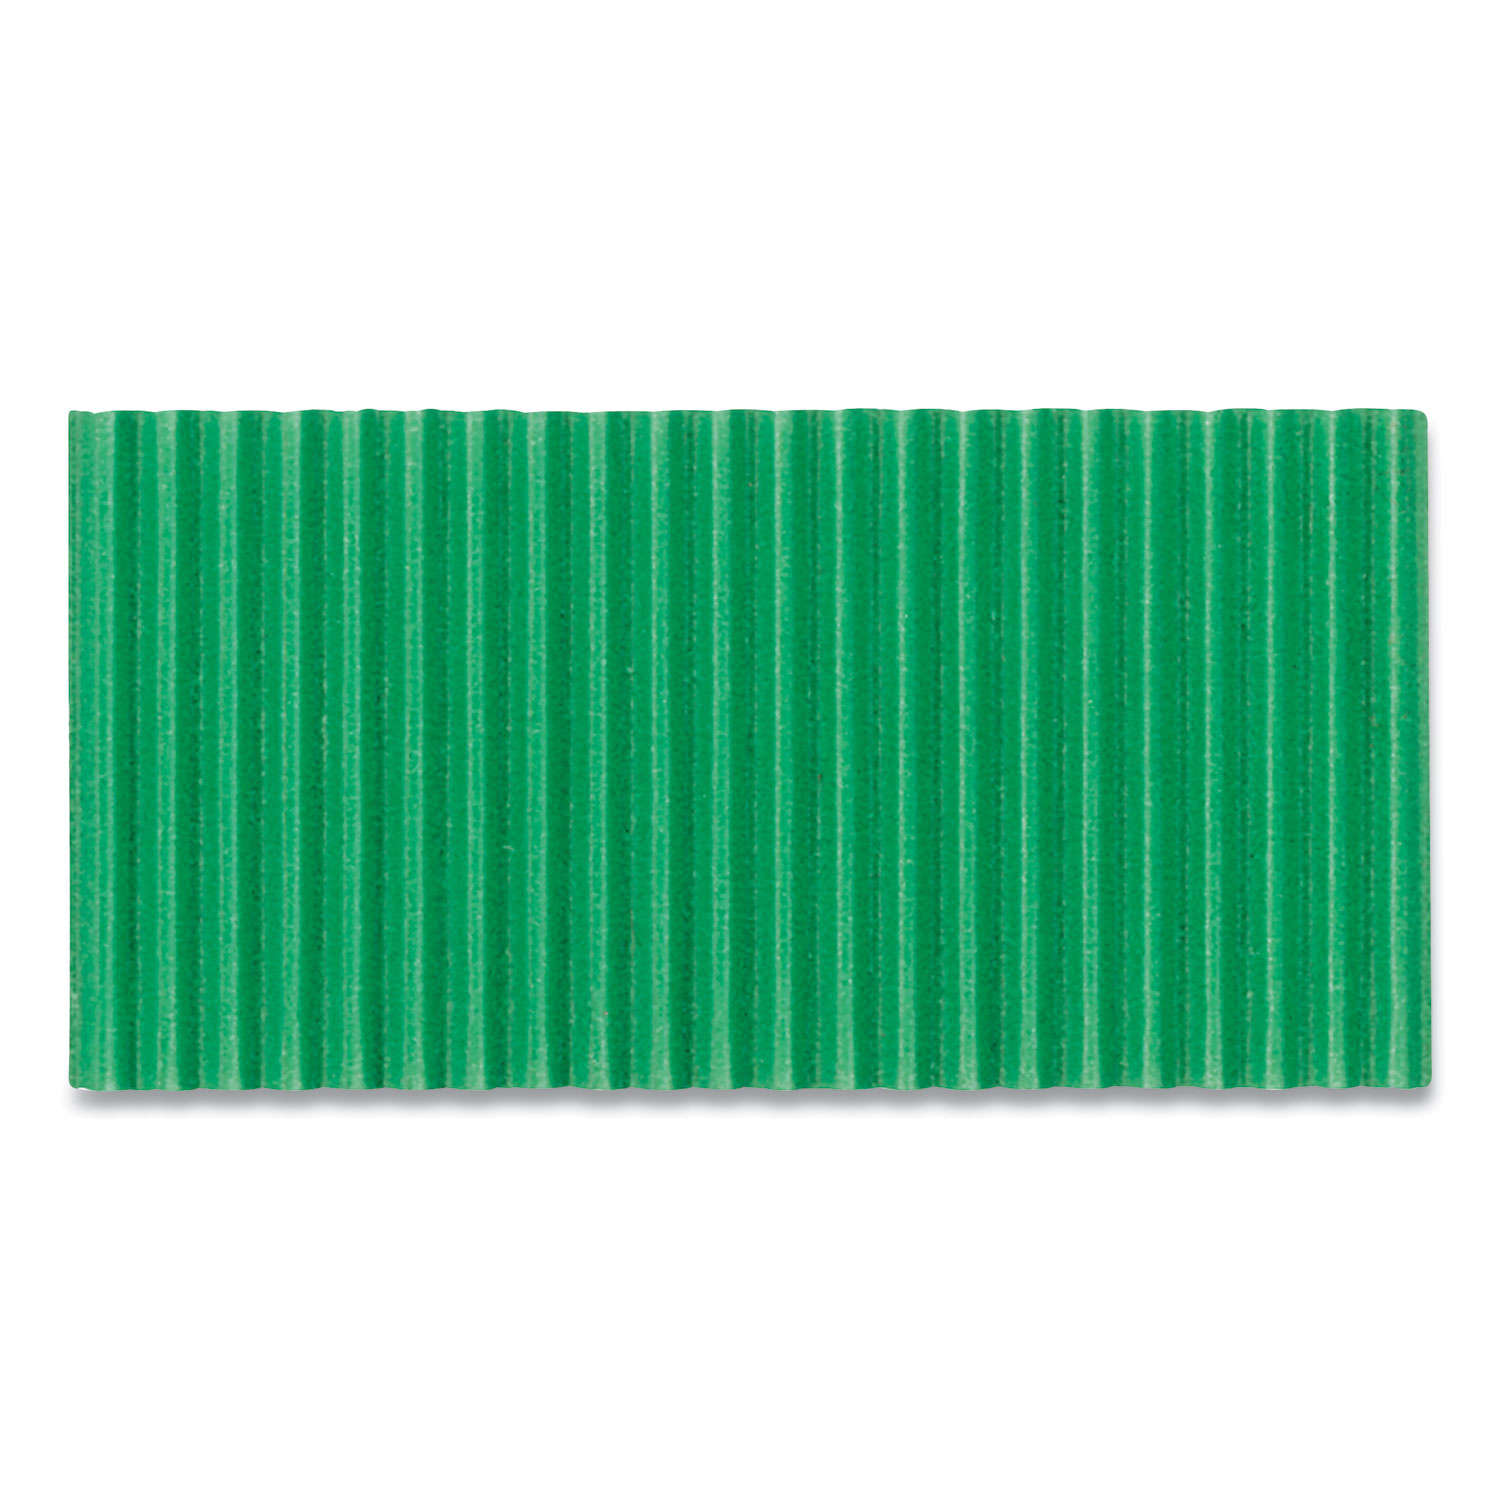 Pacon® Corobuff Corrugated Paper Roll, 48 x 25 ft, Emerald Green